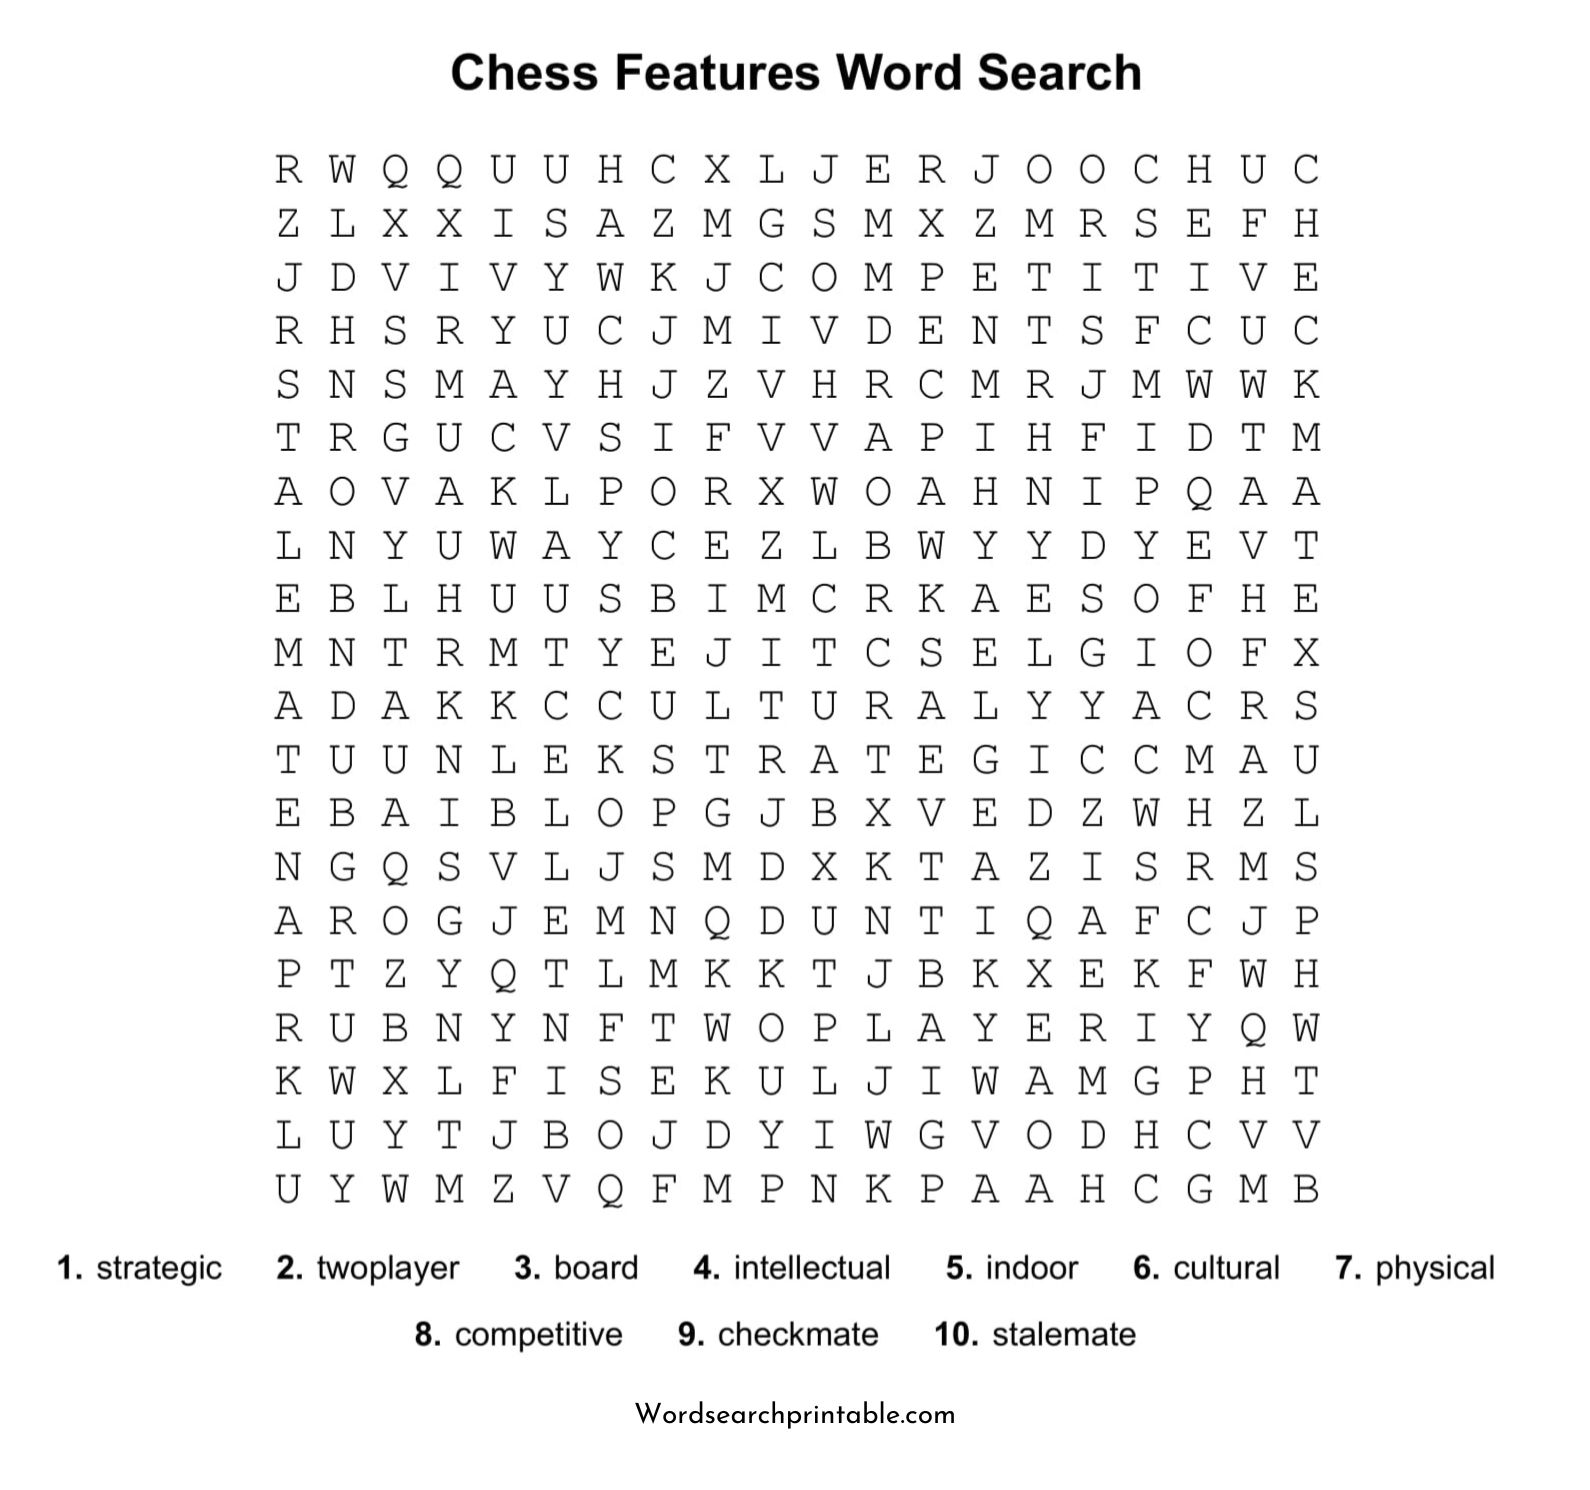 chess features word search puzzle